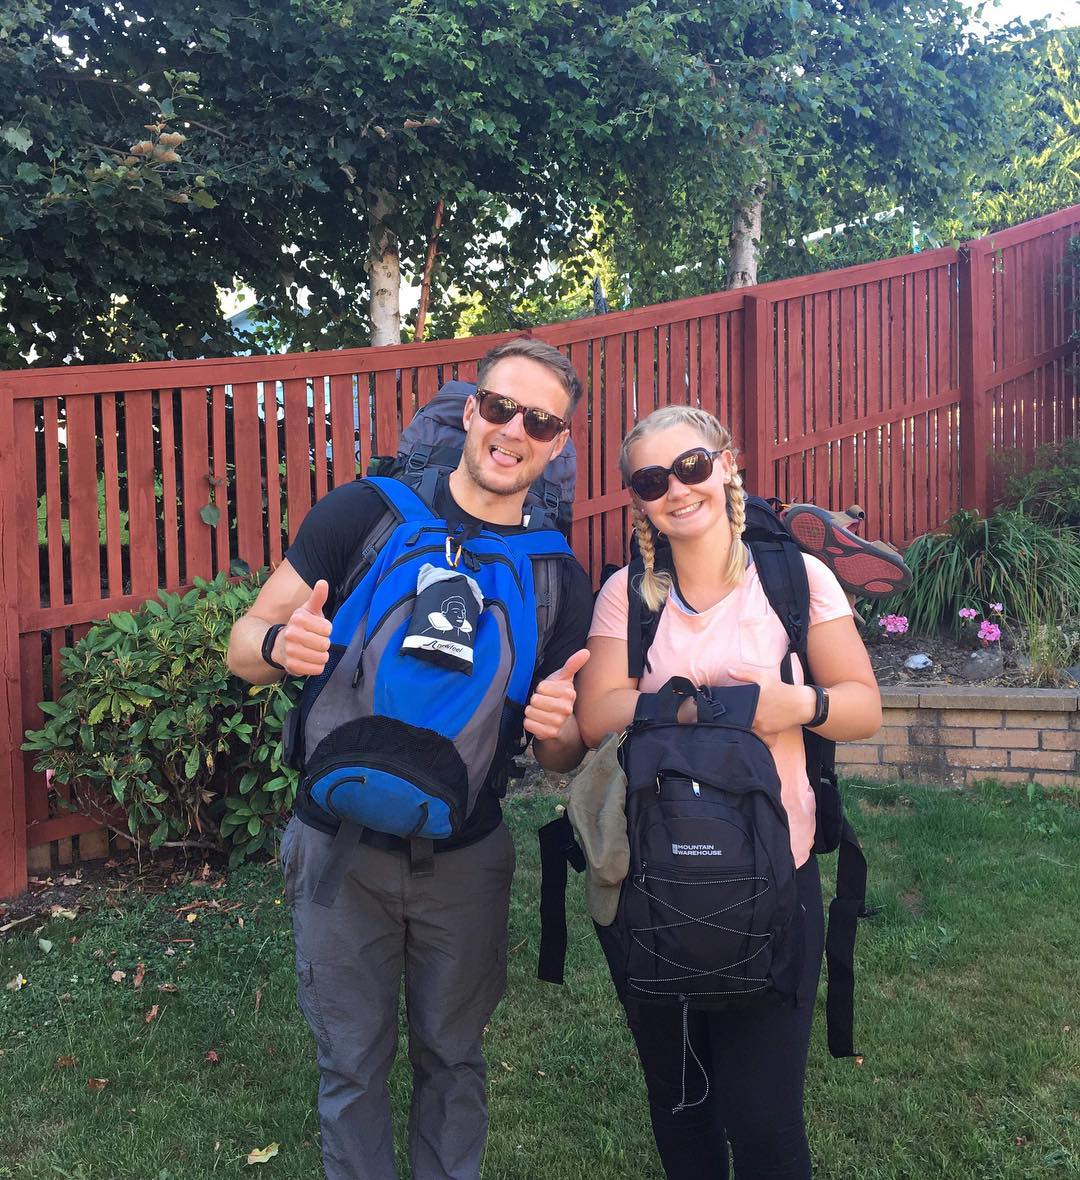 gemma and campbell backpacking